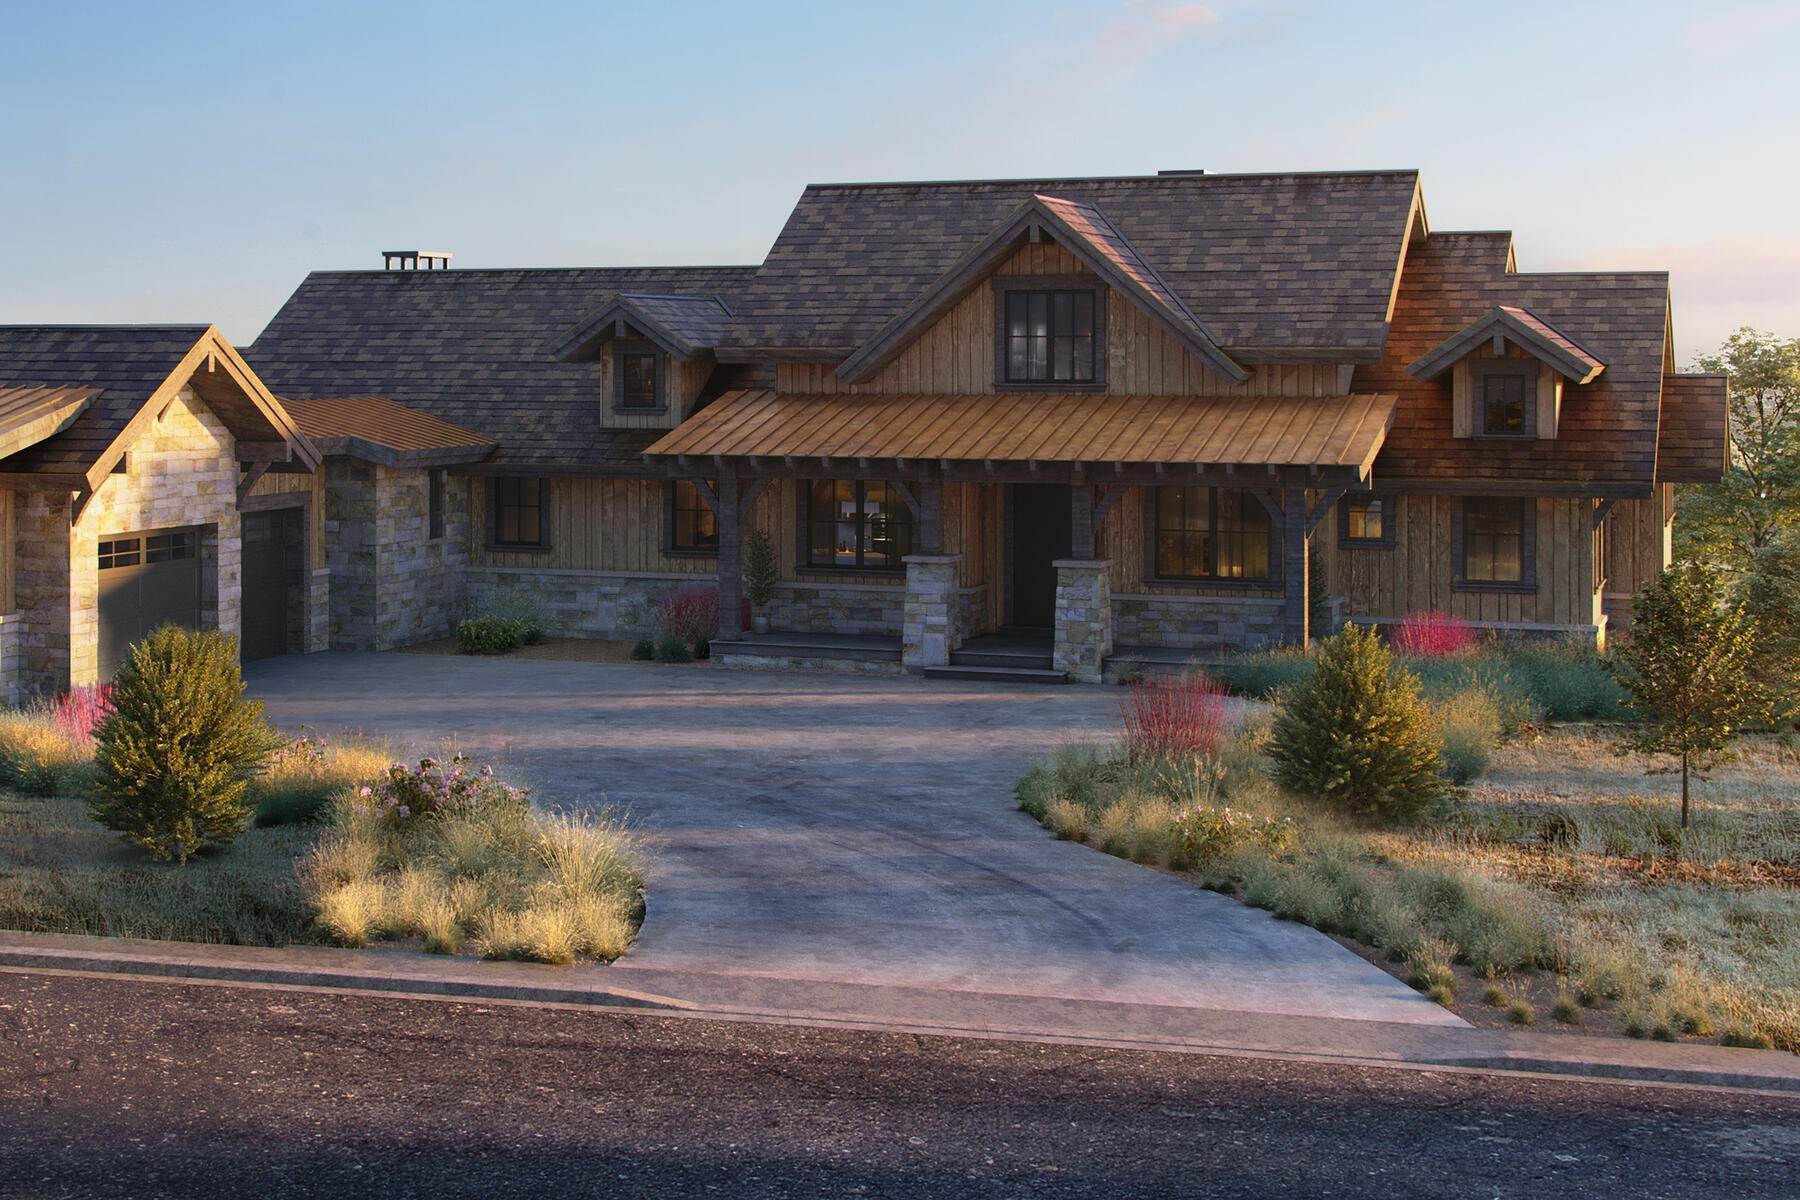 Single Family Homes for Sale at Red Ledges New Custom Home Boasts Mountain Views and Great Location 113 N Haystack Mountain Dr Heber City, Utah 84032 United States